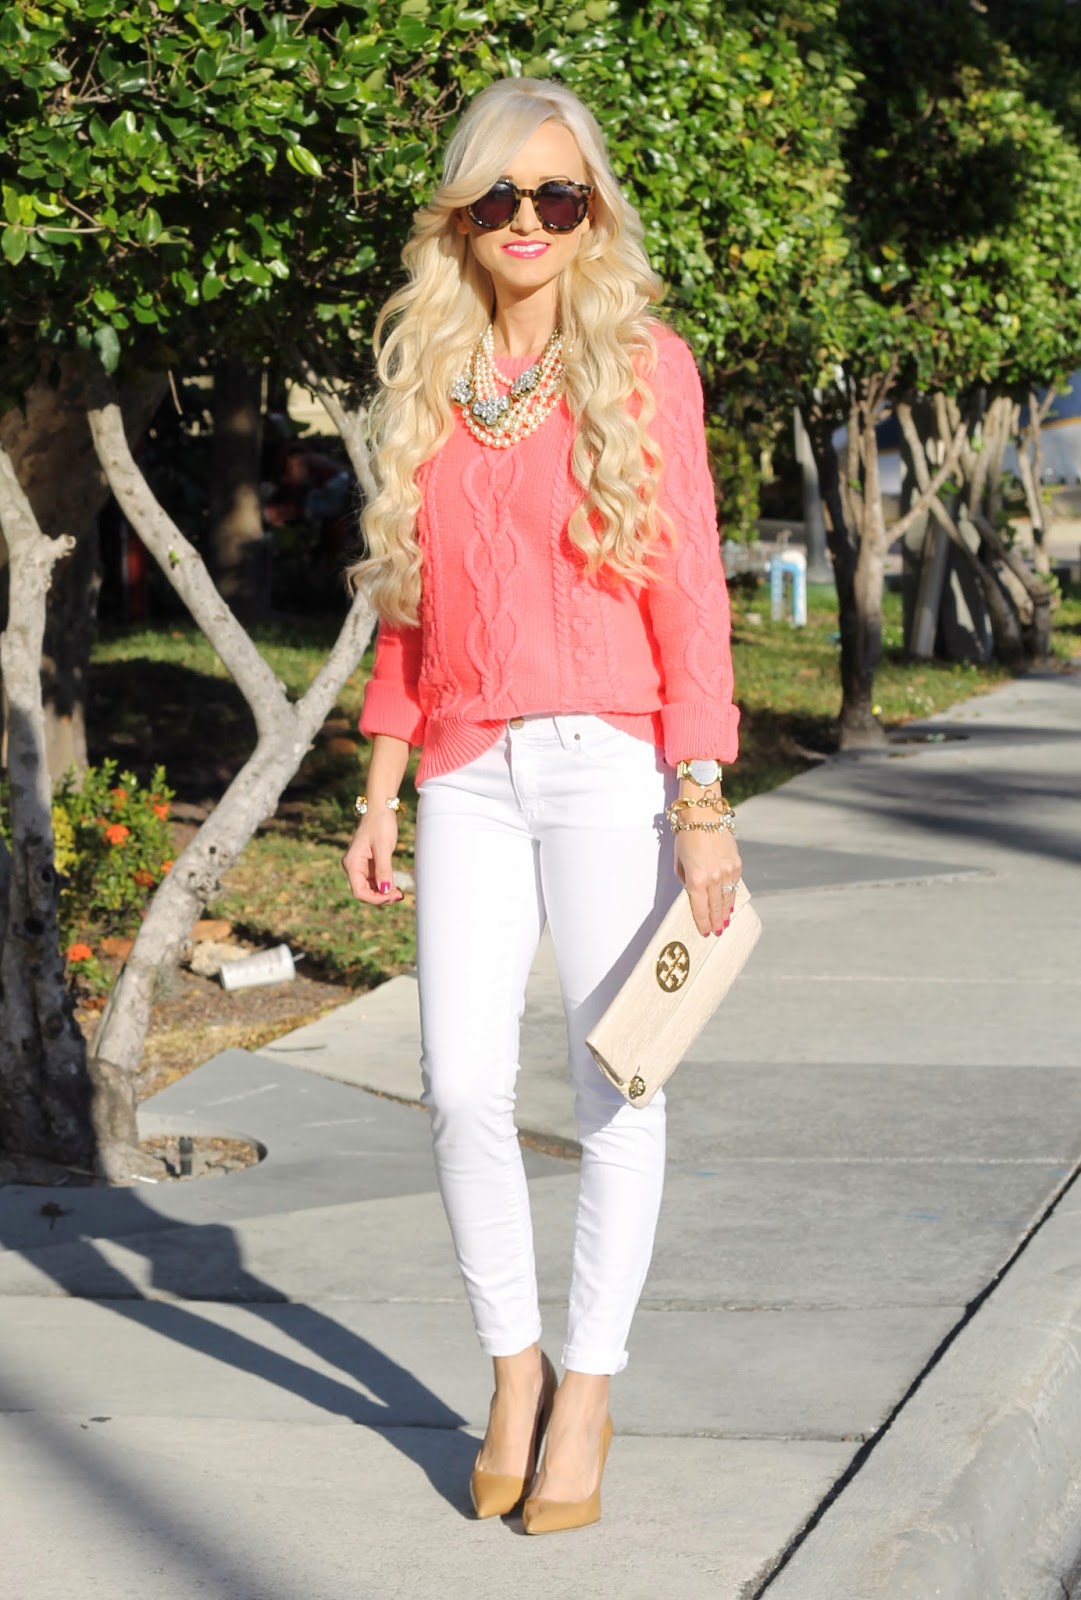 A Spoonful of Style: Neon Cable Knit...